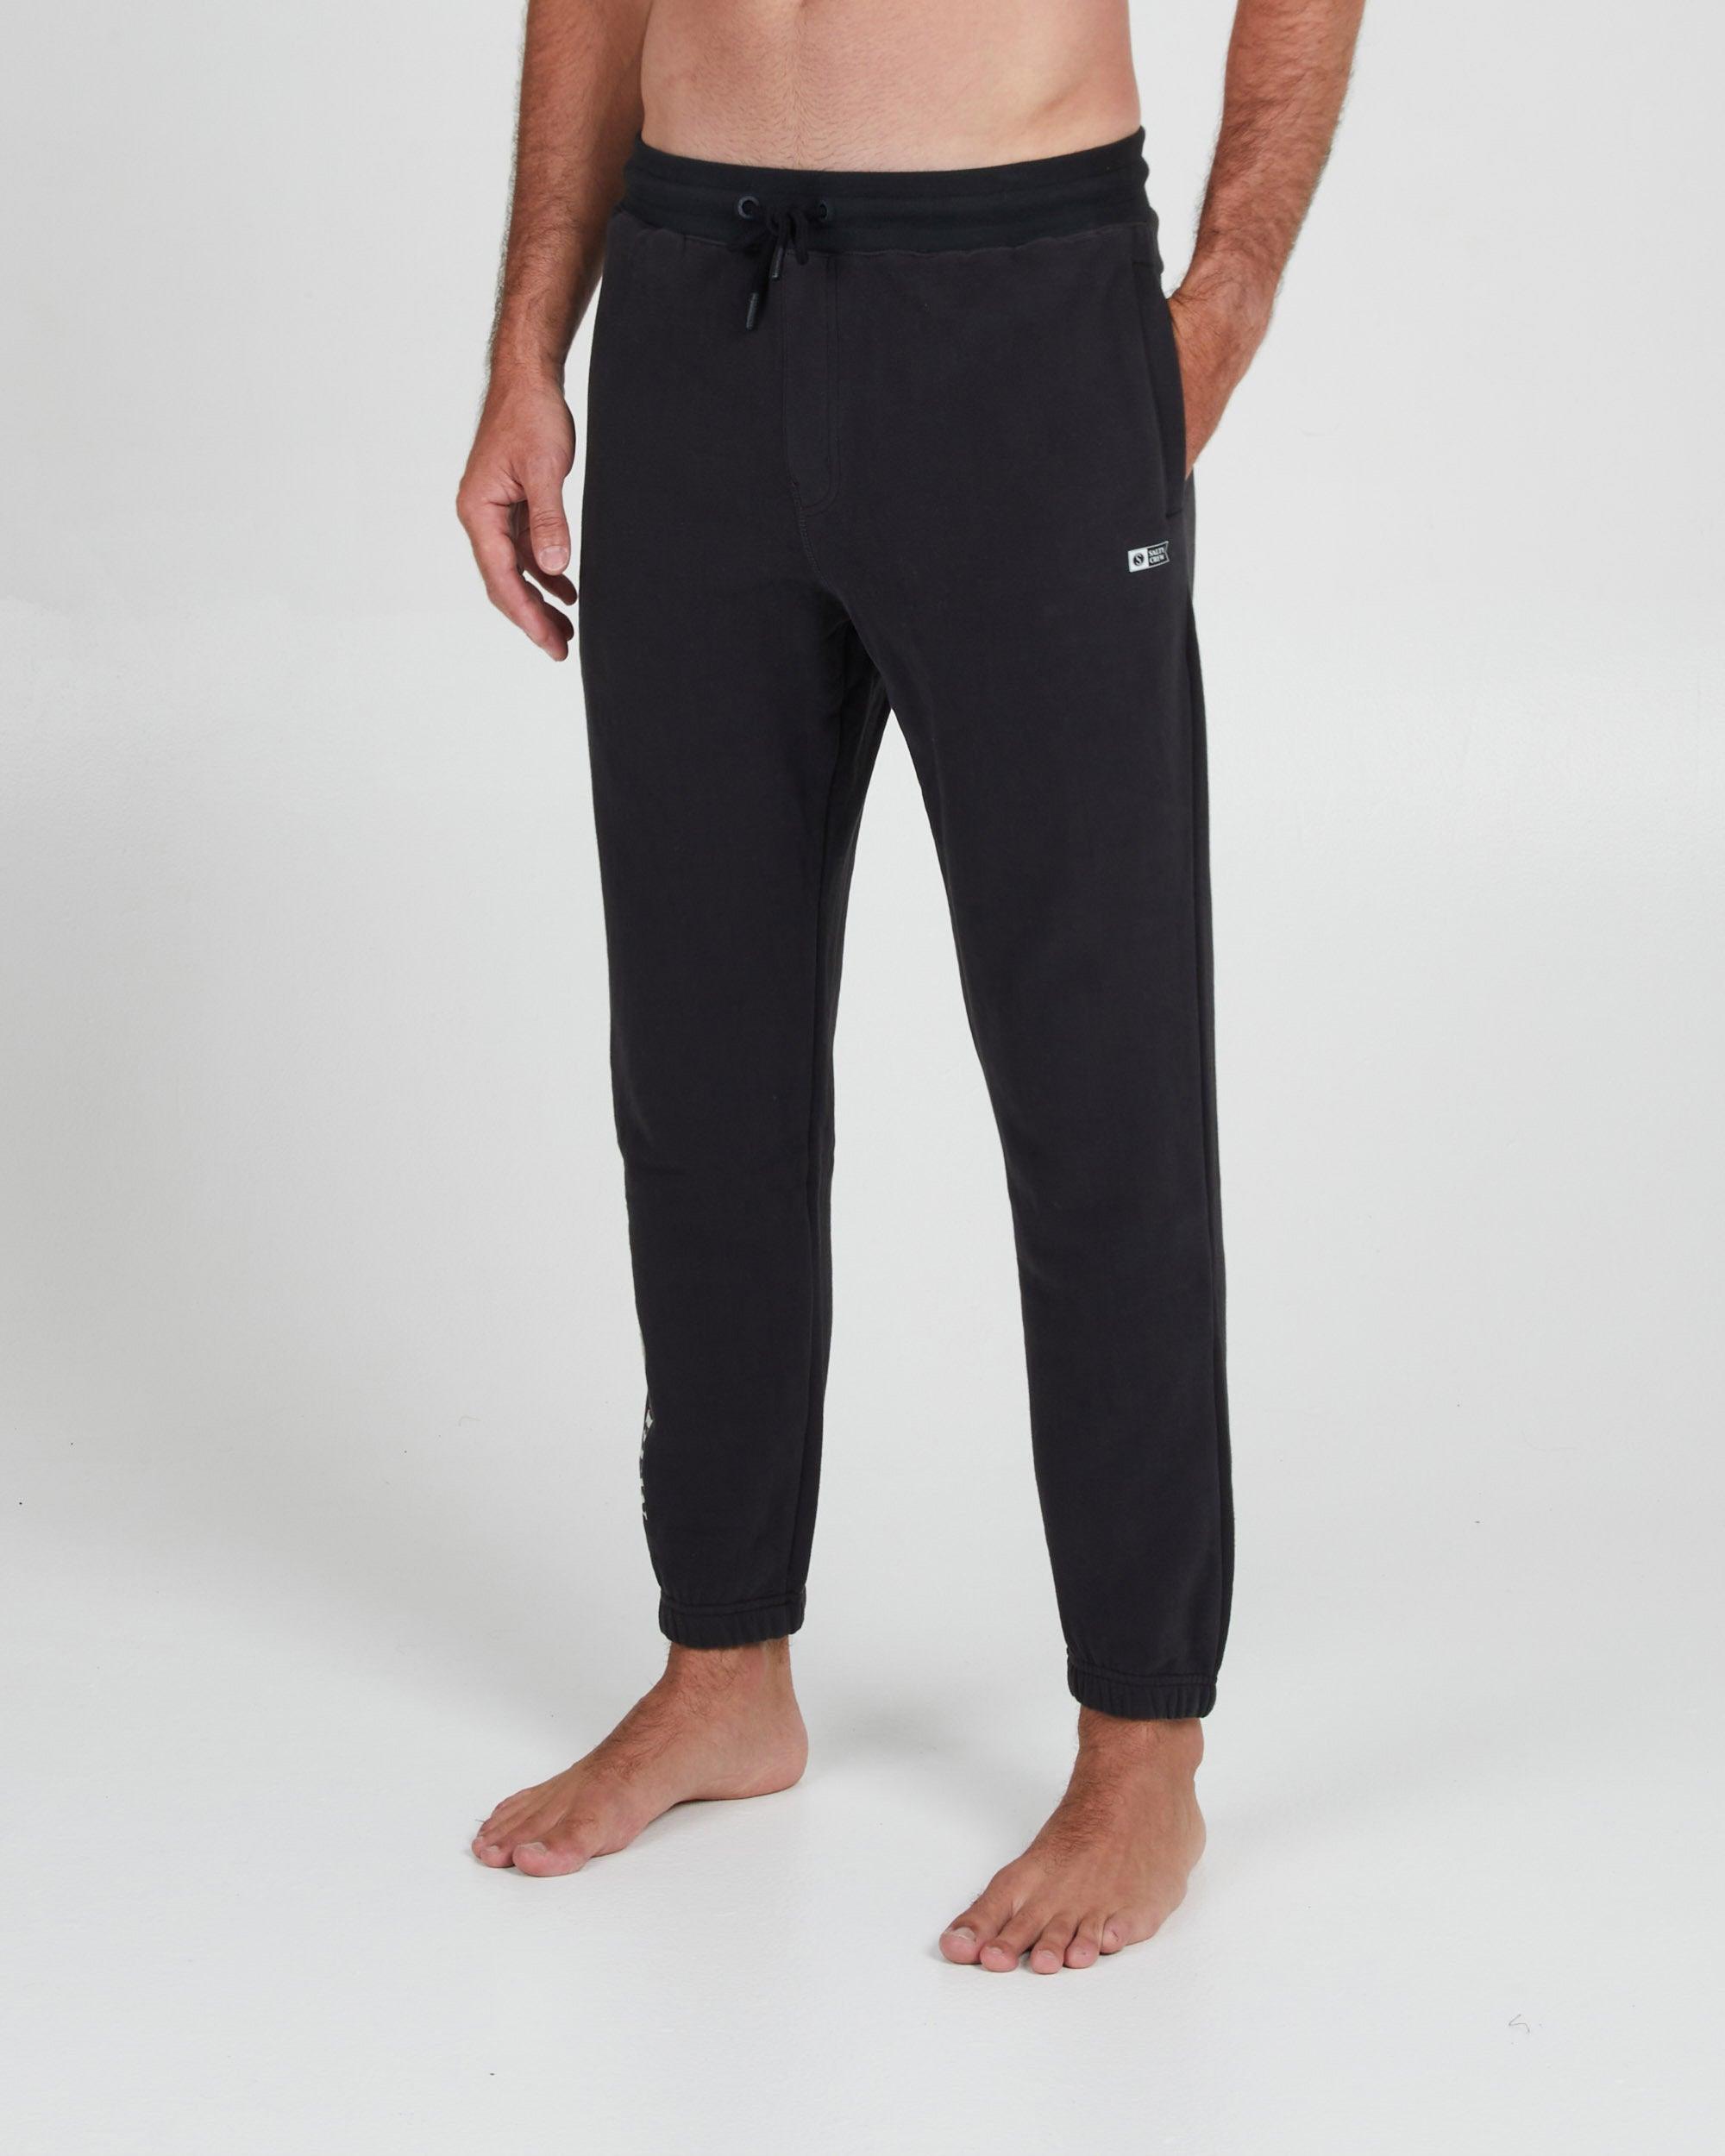 Dockside Sweatpant - Black - Purpose-Built / Home of the Trades